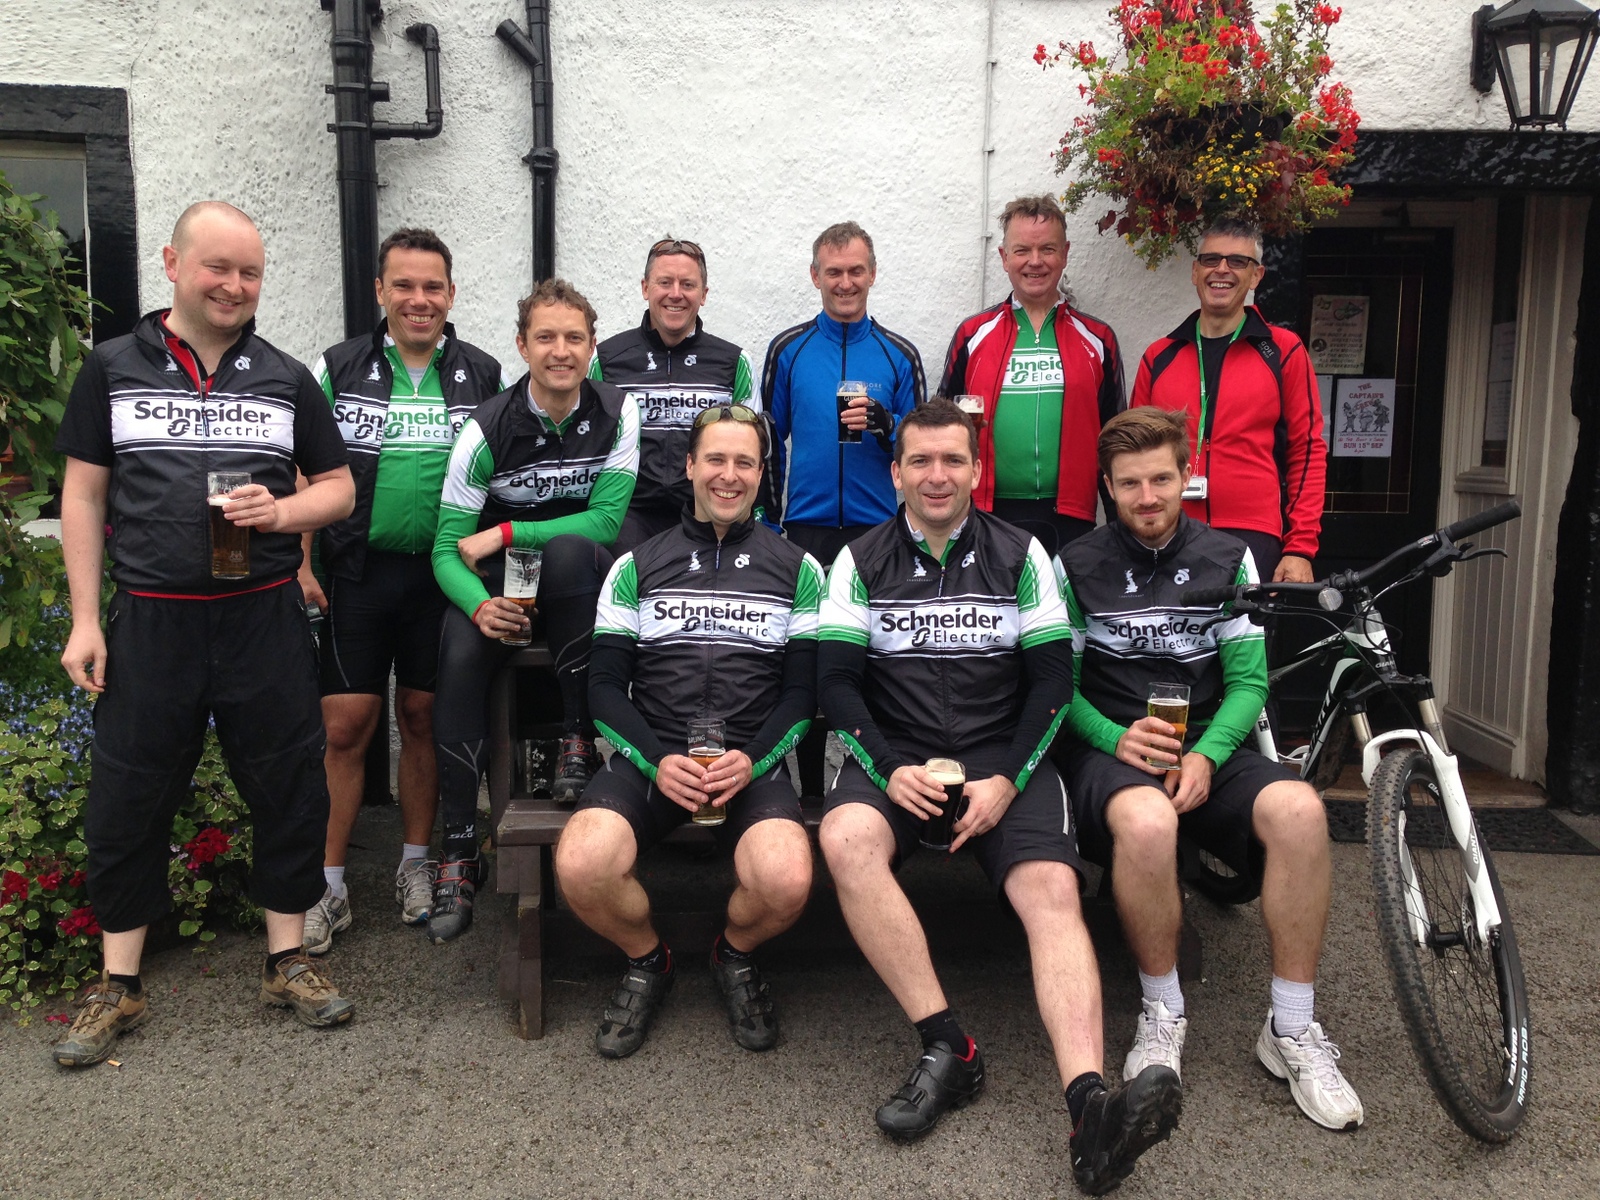 A well earned beer at the end of day one (L-R: Stuart, Benois, Valters, Matt, Richard, Me, Dave, Loyd, Lee, Damien)